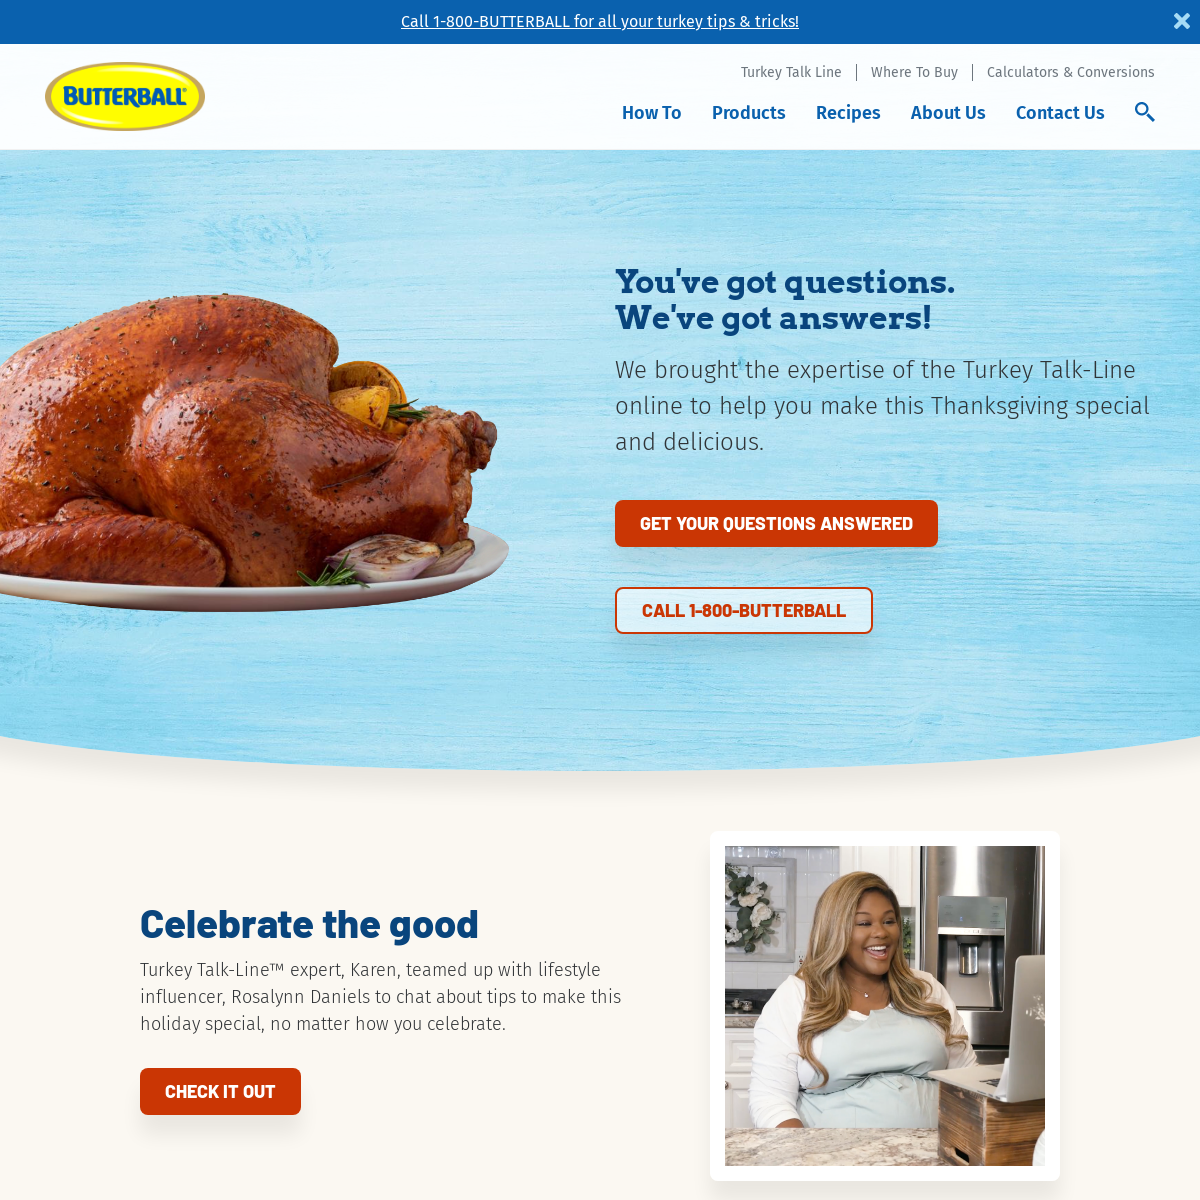 A complete backup of butterball.com